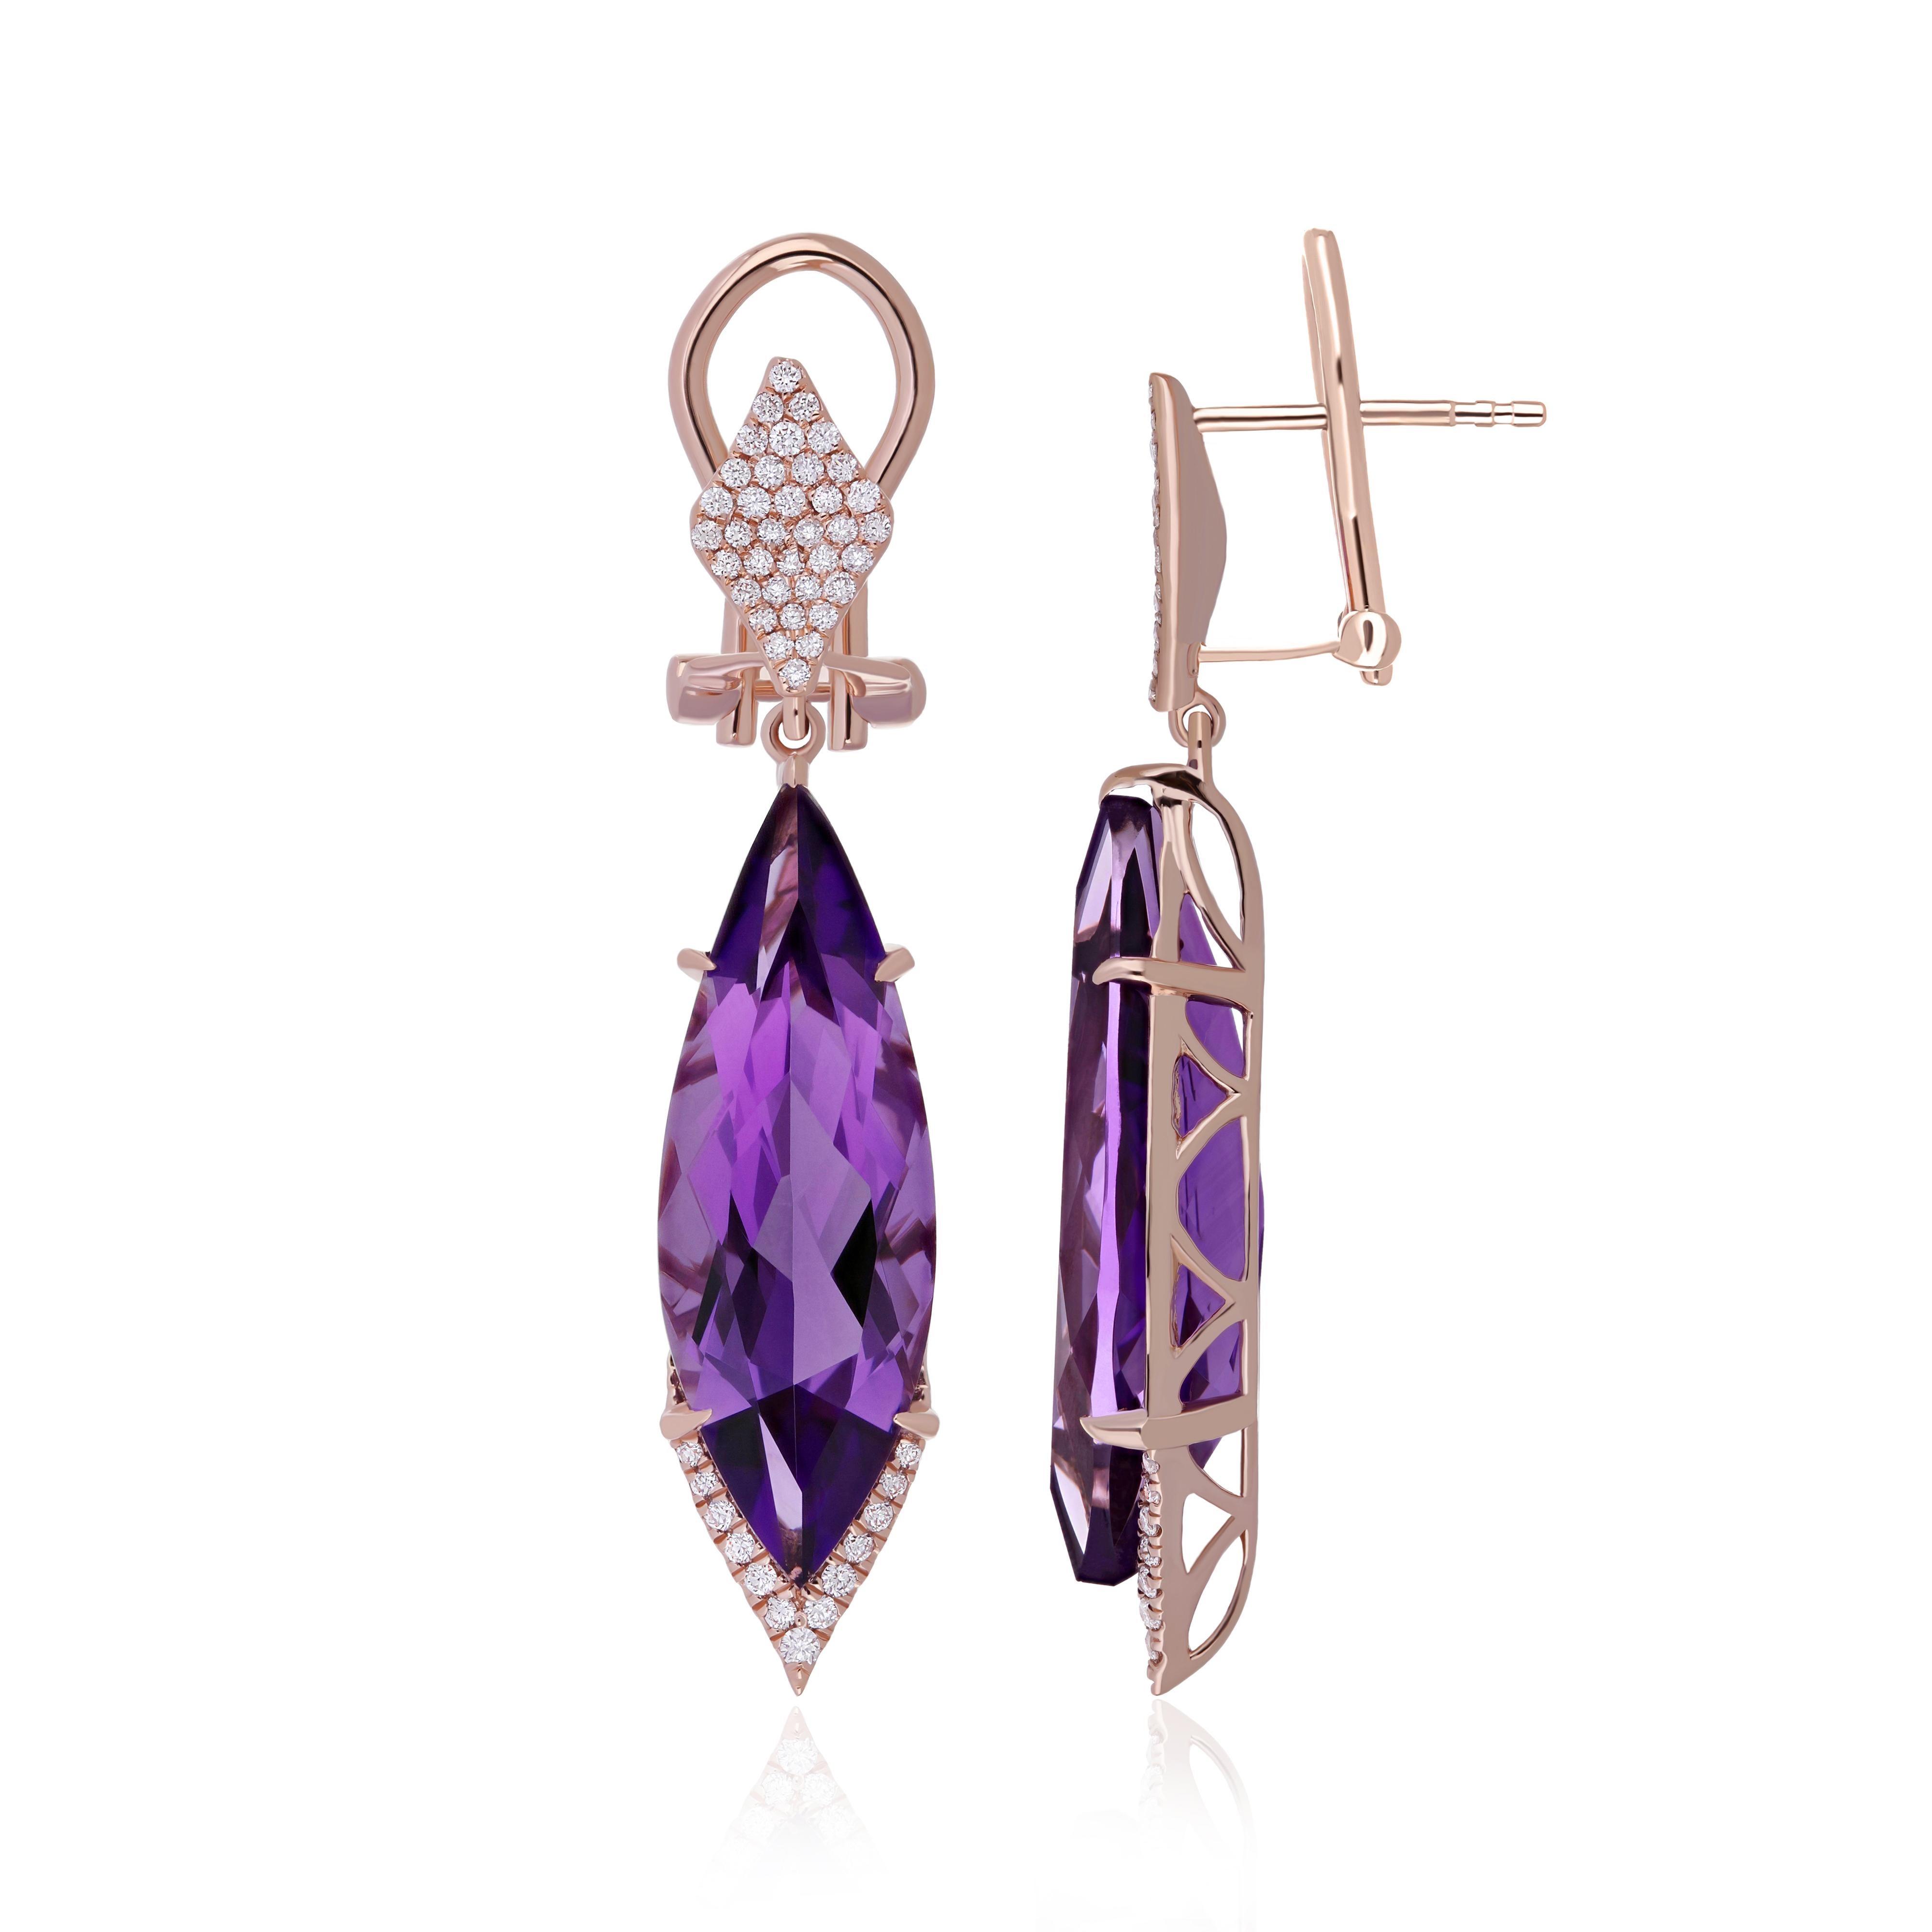 Elegant and Exquisitely Detailed Rose Gold Earring set with Pear Marquise Shape Amethyst weighing approx. 10.95Cts and with micro prove set Diamonds weighing approx. 0.40Cts Beautifully Hand Crafted in 
14 karat, Rose Gold Earring.

Product